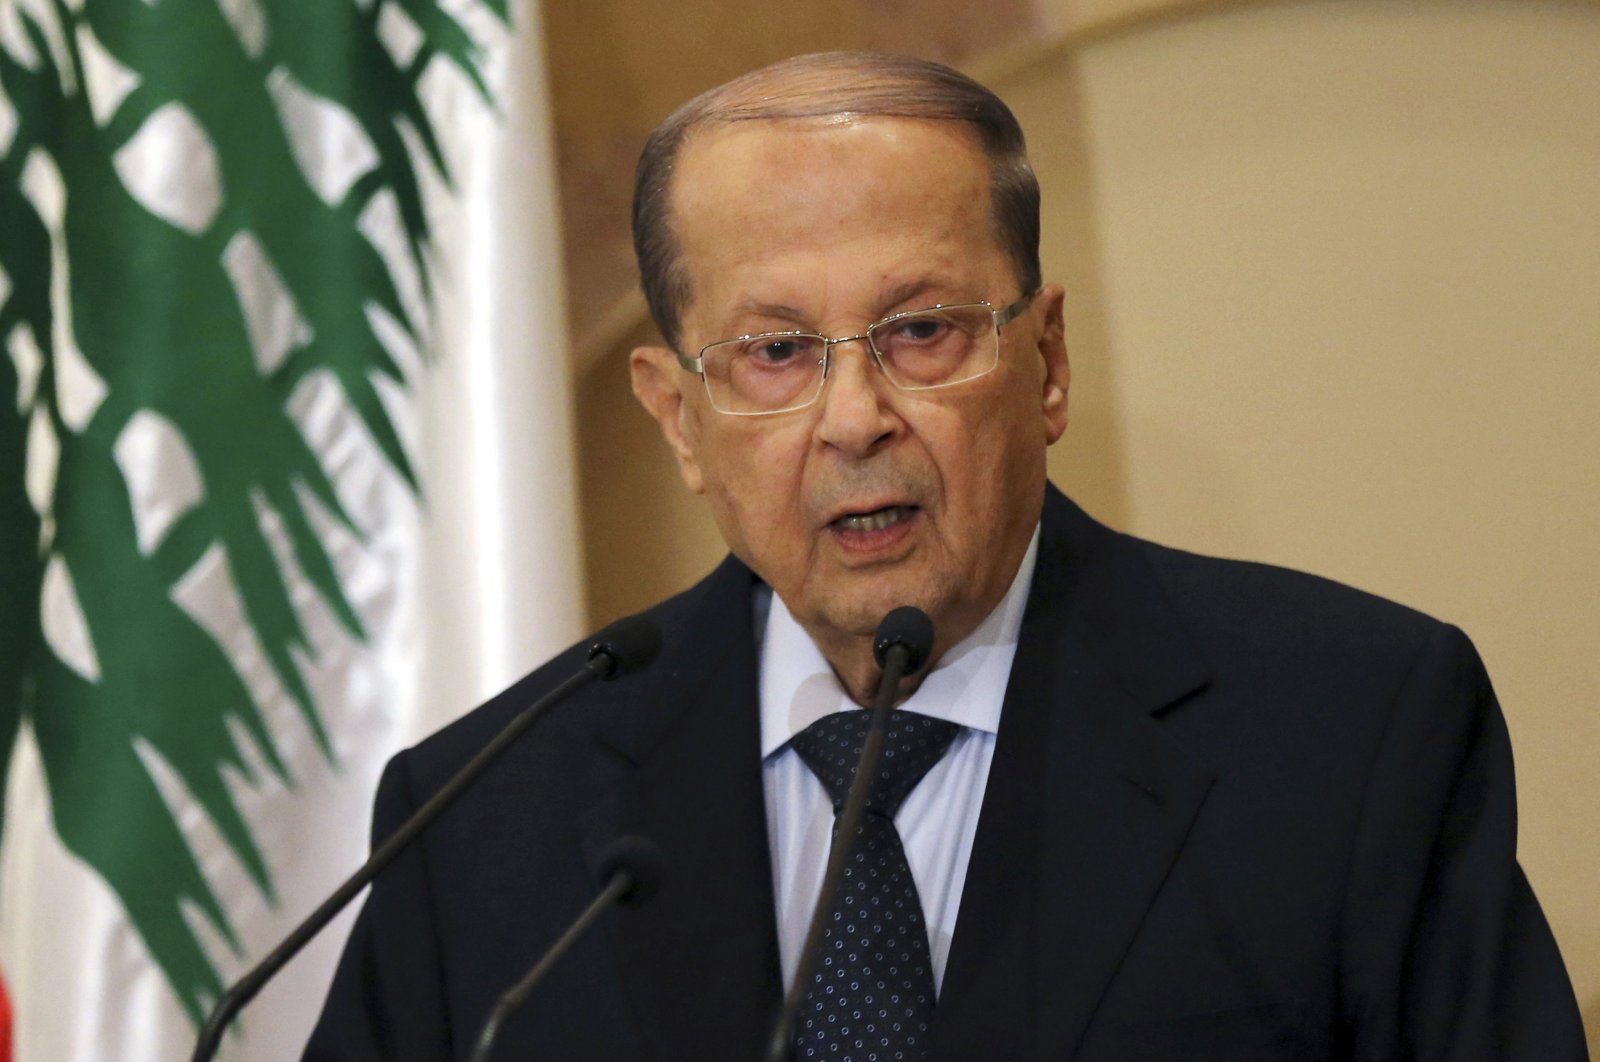 Lebanese President Michel Aoun is seen interacting with journalists after his predecessor endorsed him for the presidency, in Beirut, Lebanon, Oct. 20, 2016. (AP Photo)